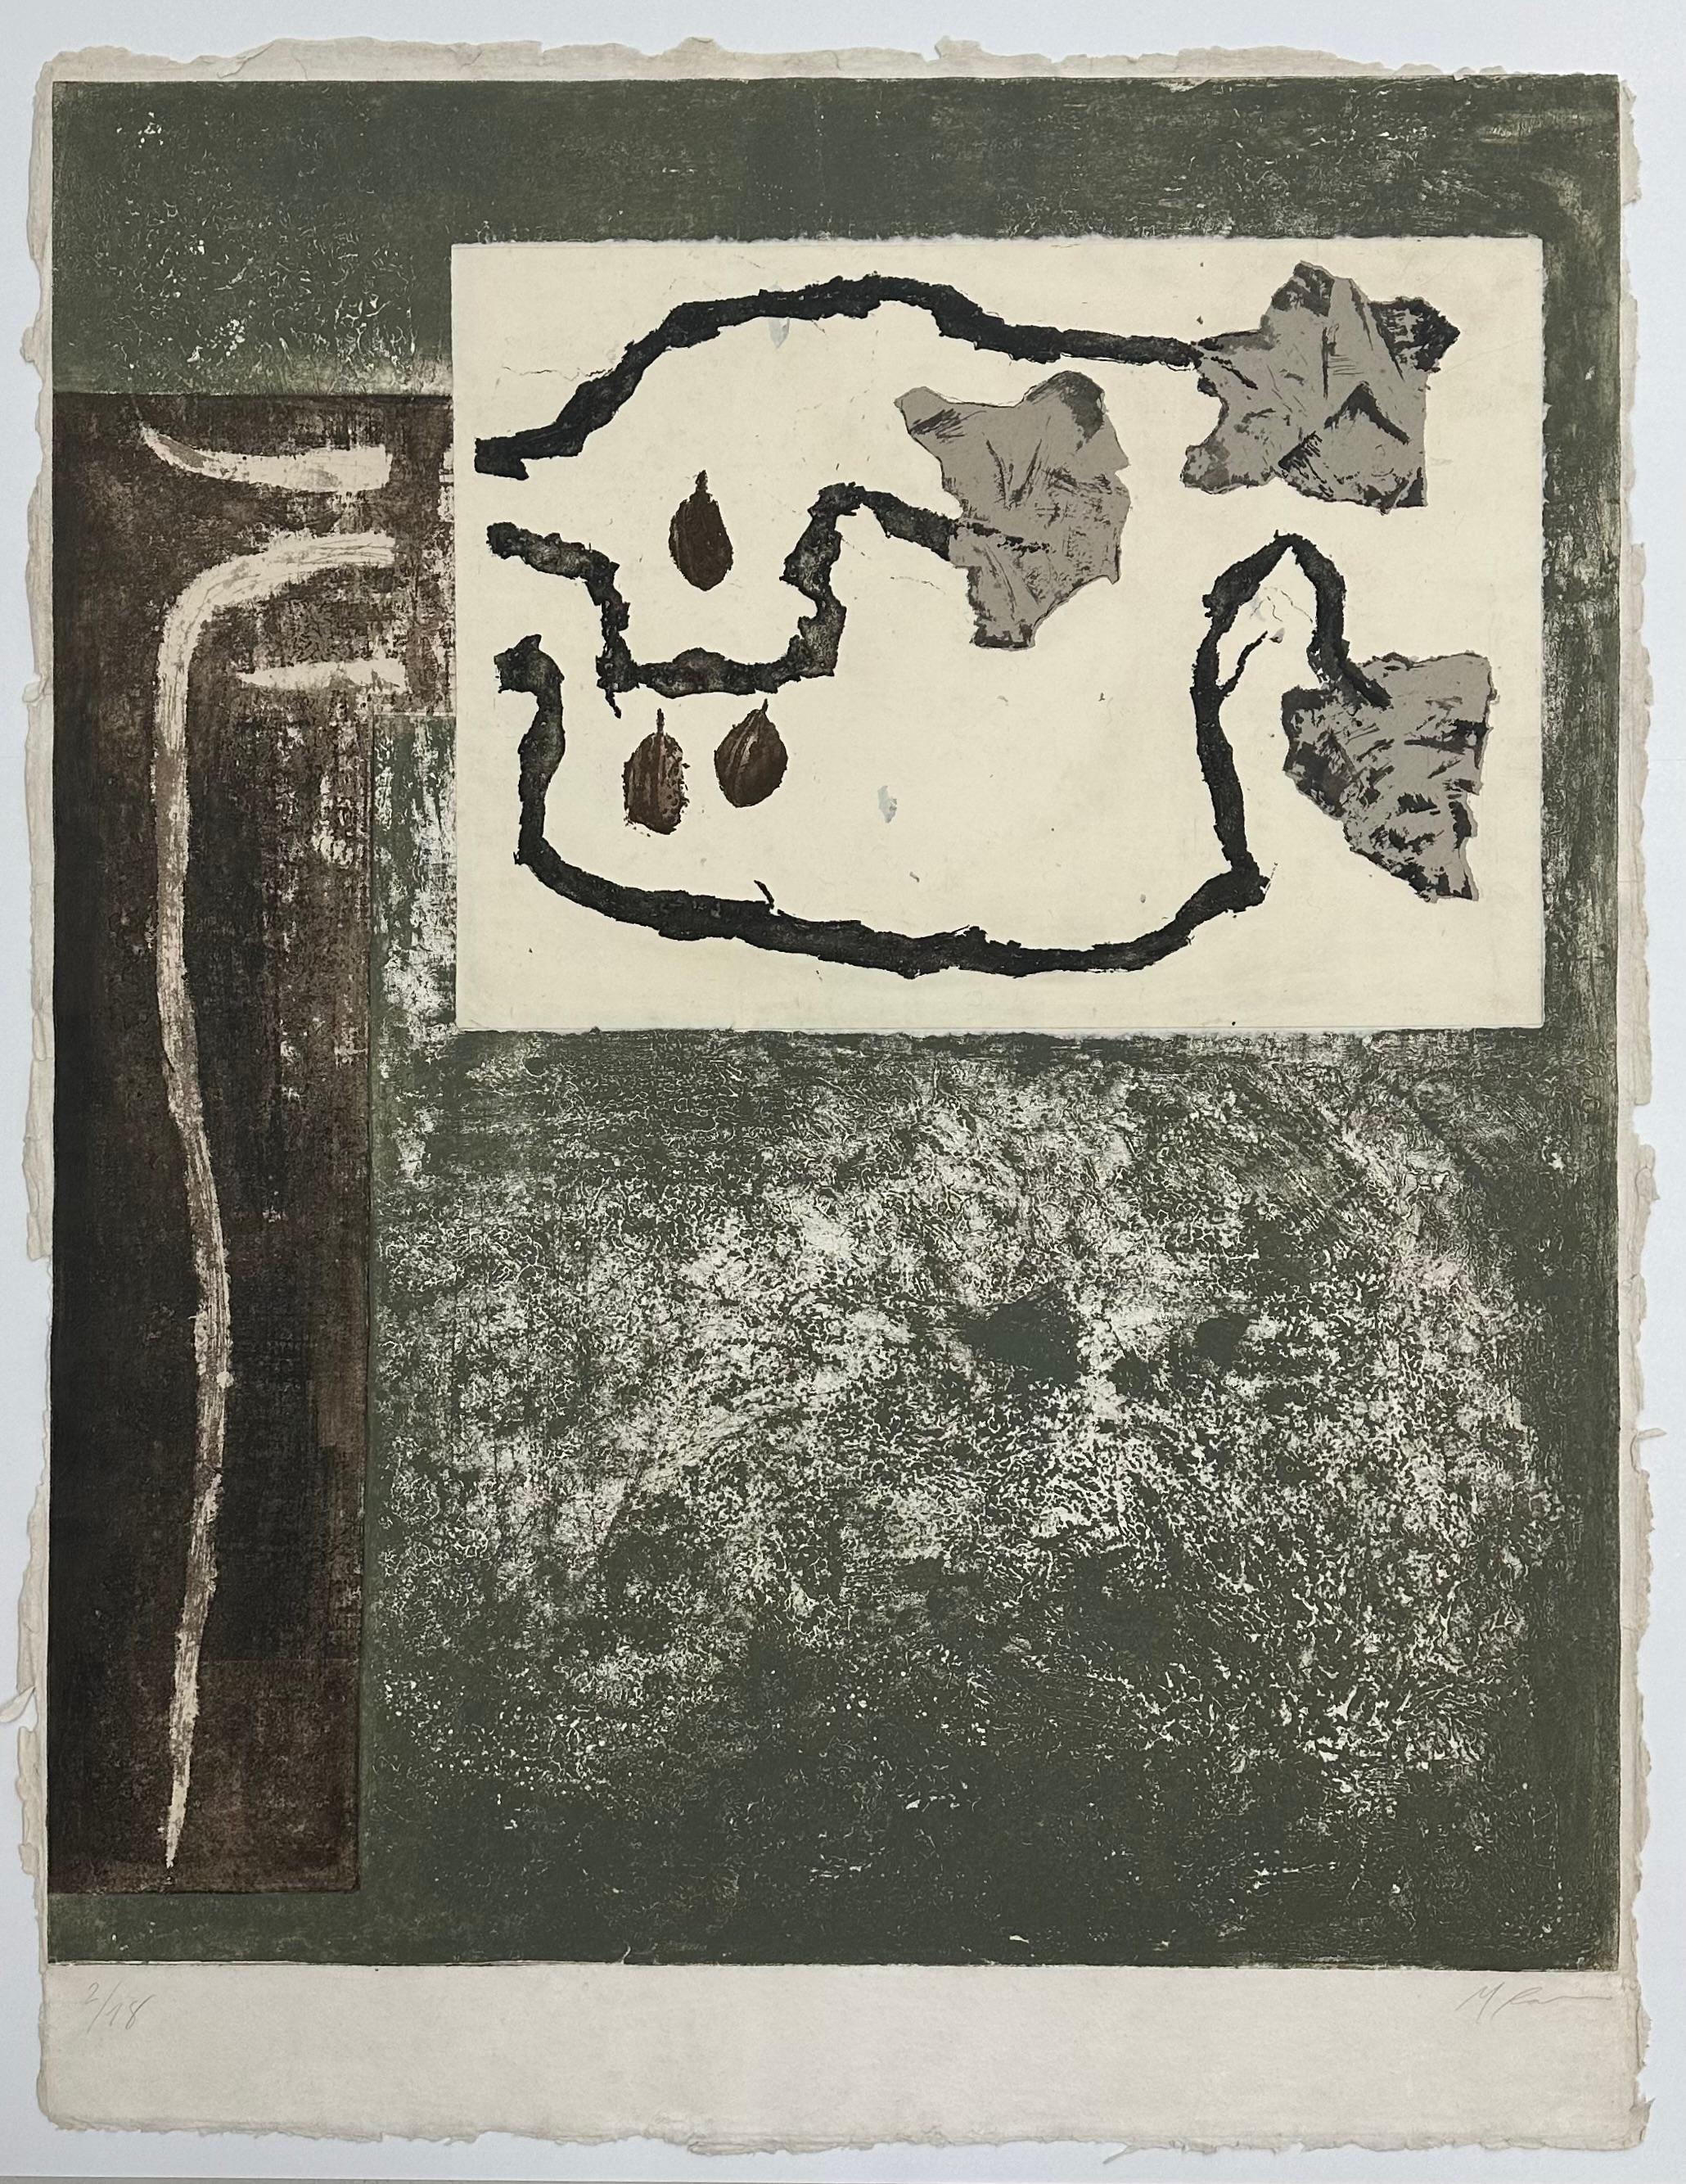 Miguel Rasero (Spain, 1955)
'Vinas', N/A
carborundum, chine colle on Heavy weight handmade paper
52.6 x 40.6 in. (133.5 x 103 cm.)
Edition of 18
ID: RAS-301
Hand-signed by author